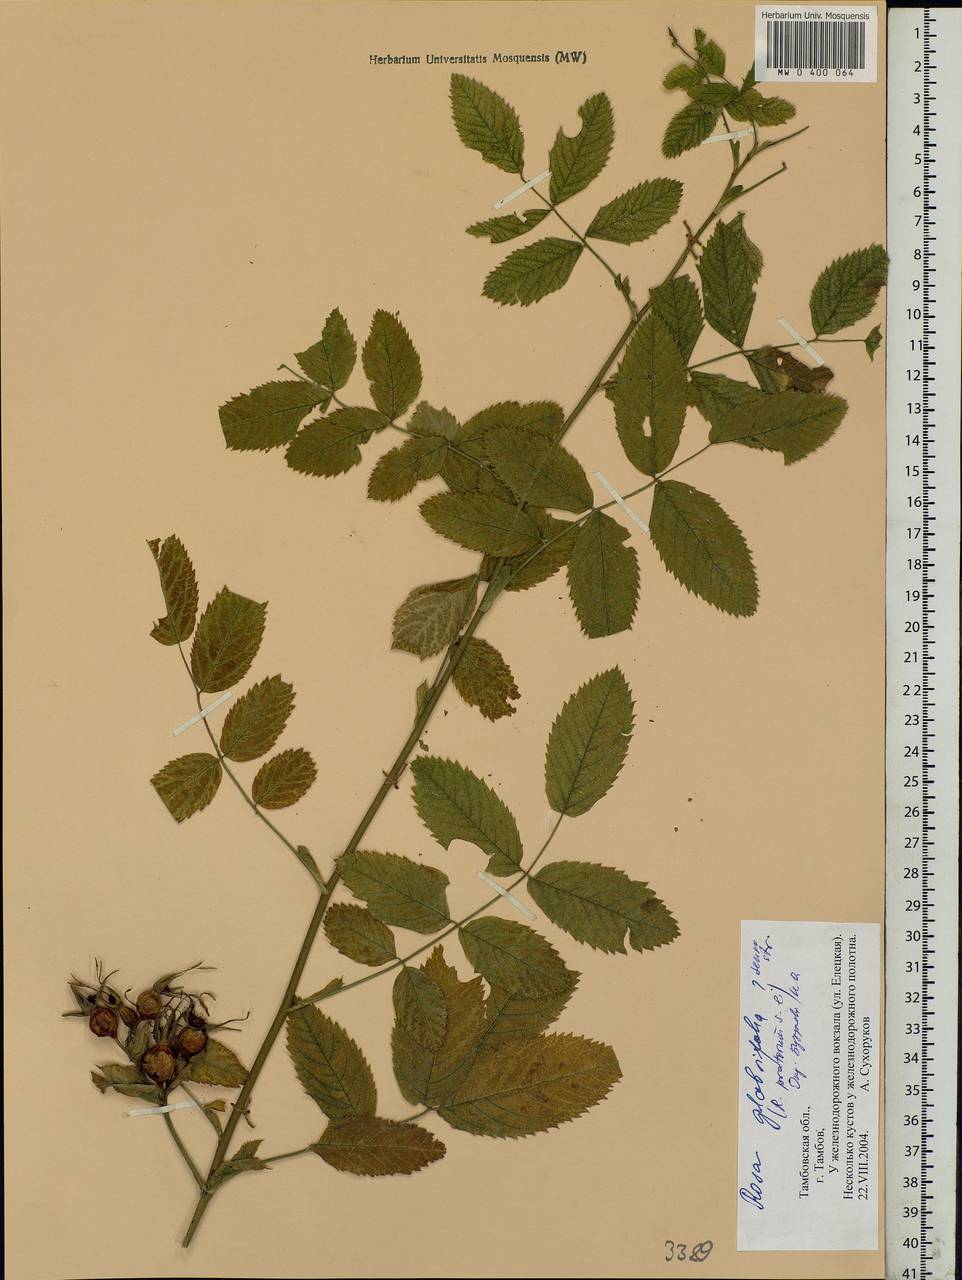 Rosa glabrifolia C. A. Mey. ex Rupr., Eastern Europe, Central forest-and-steppe region (E6) (Russia)